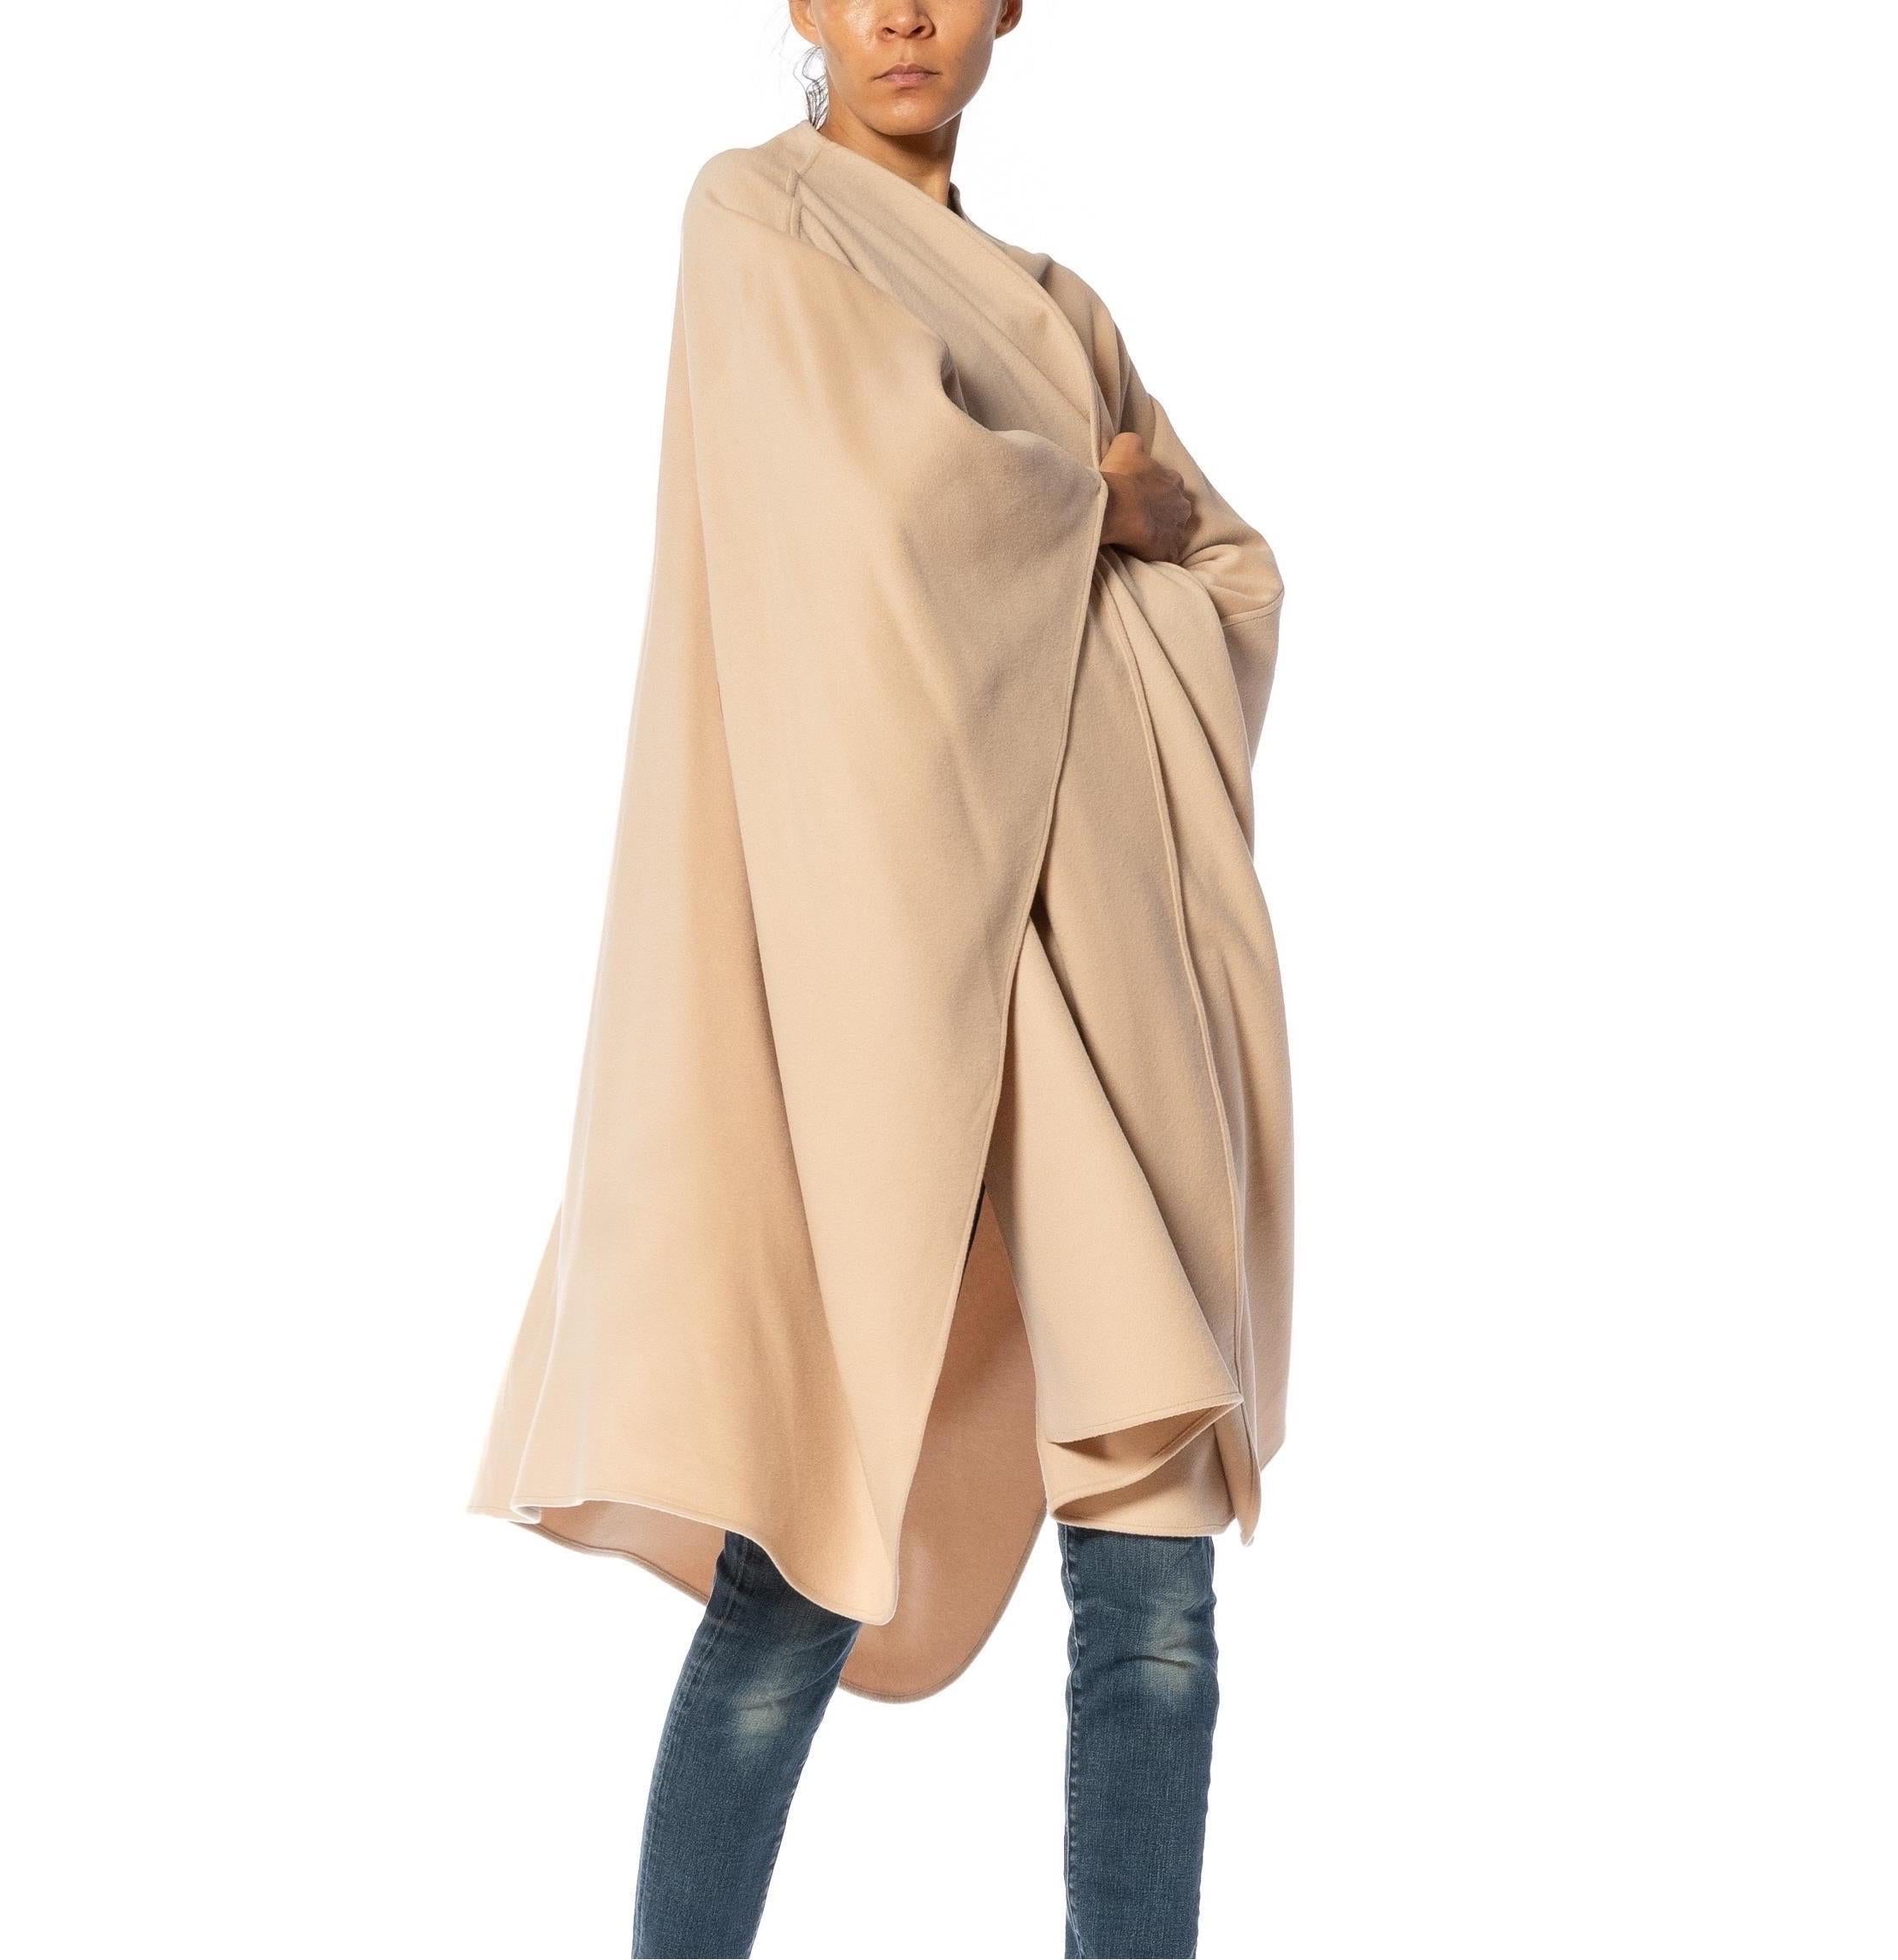 2000S GENNY Beige Cashmere Shawl For Sale 3